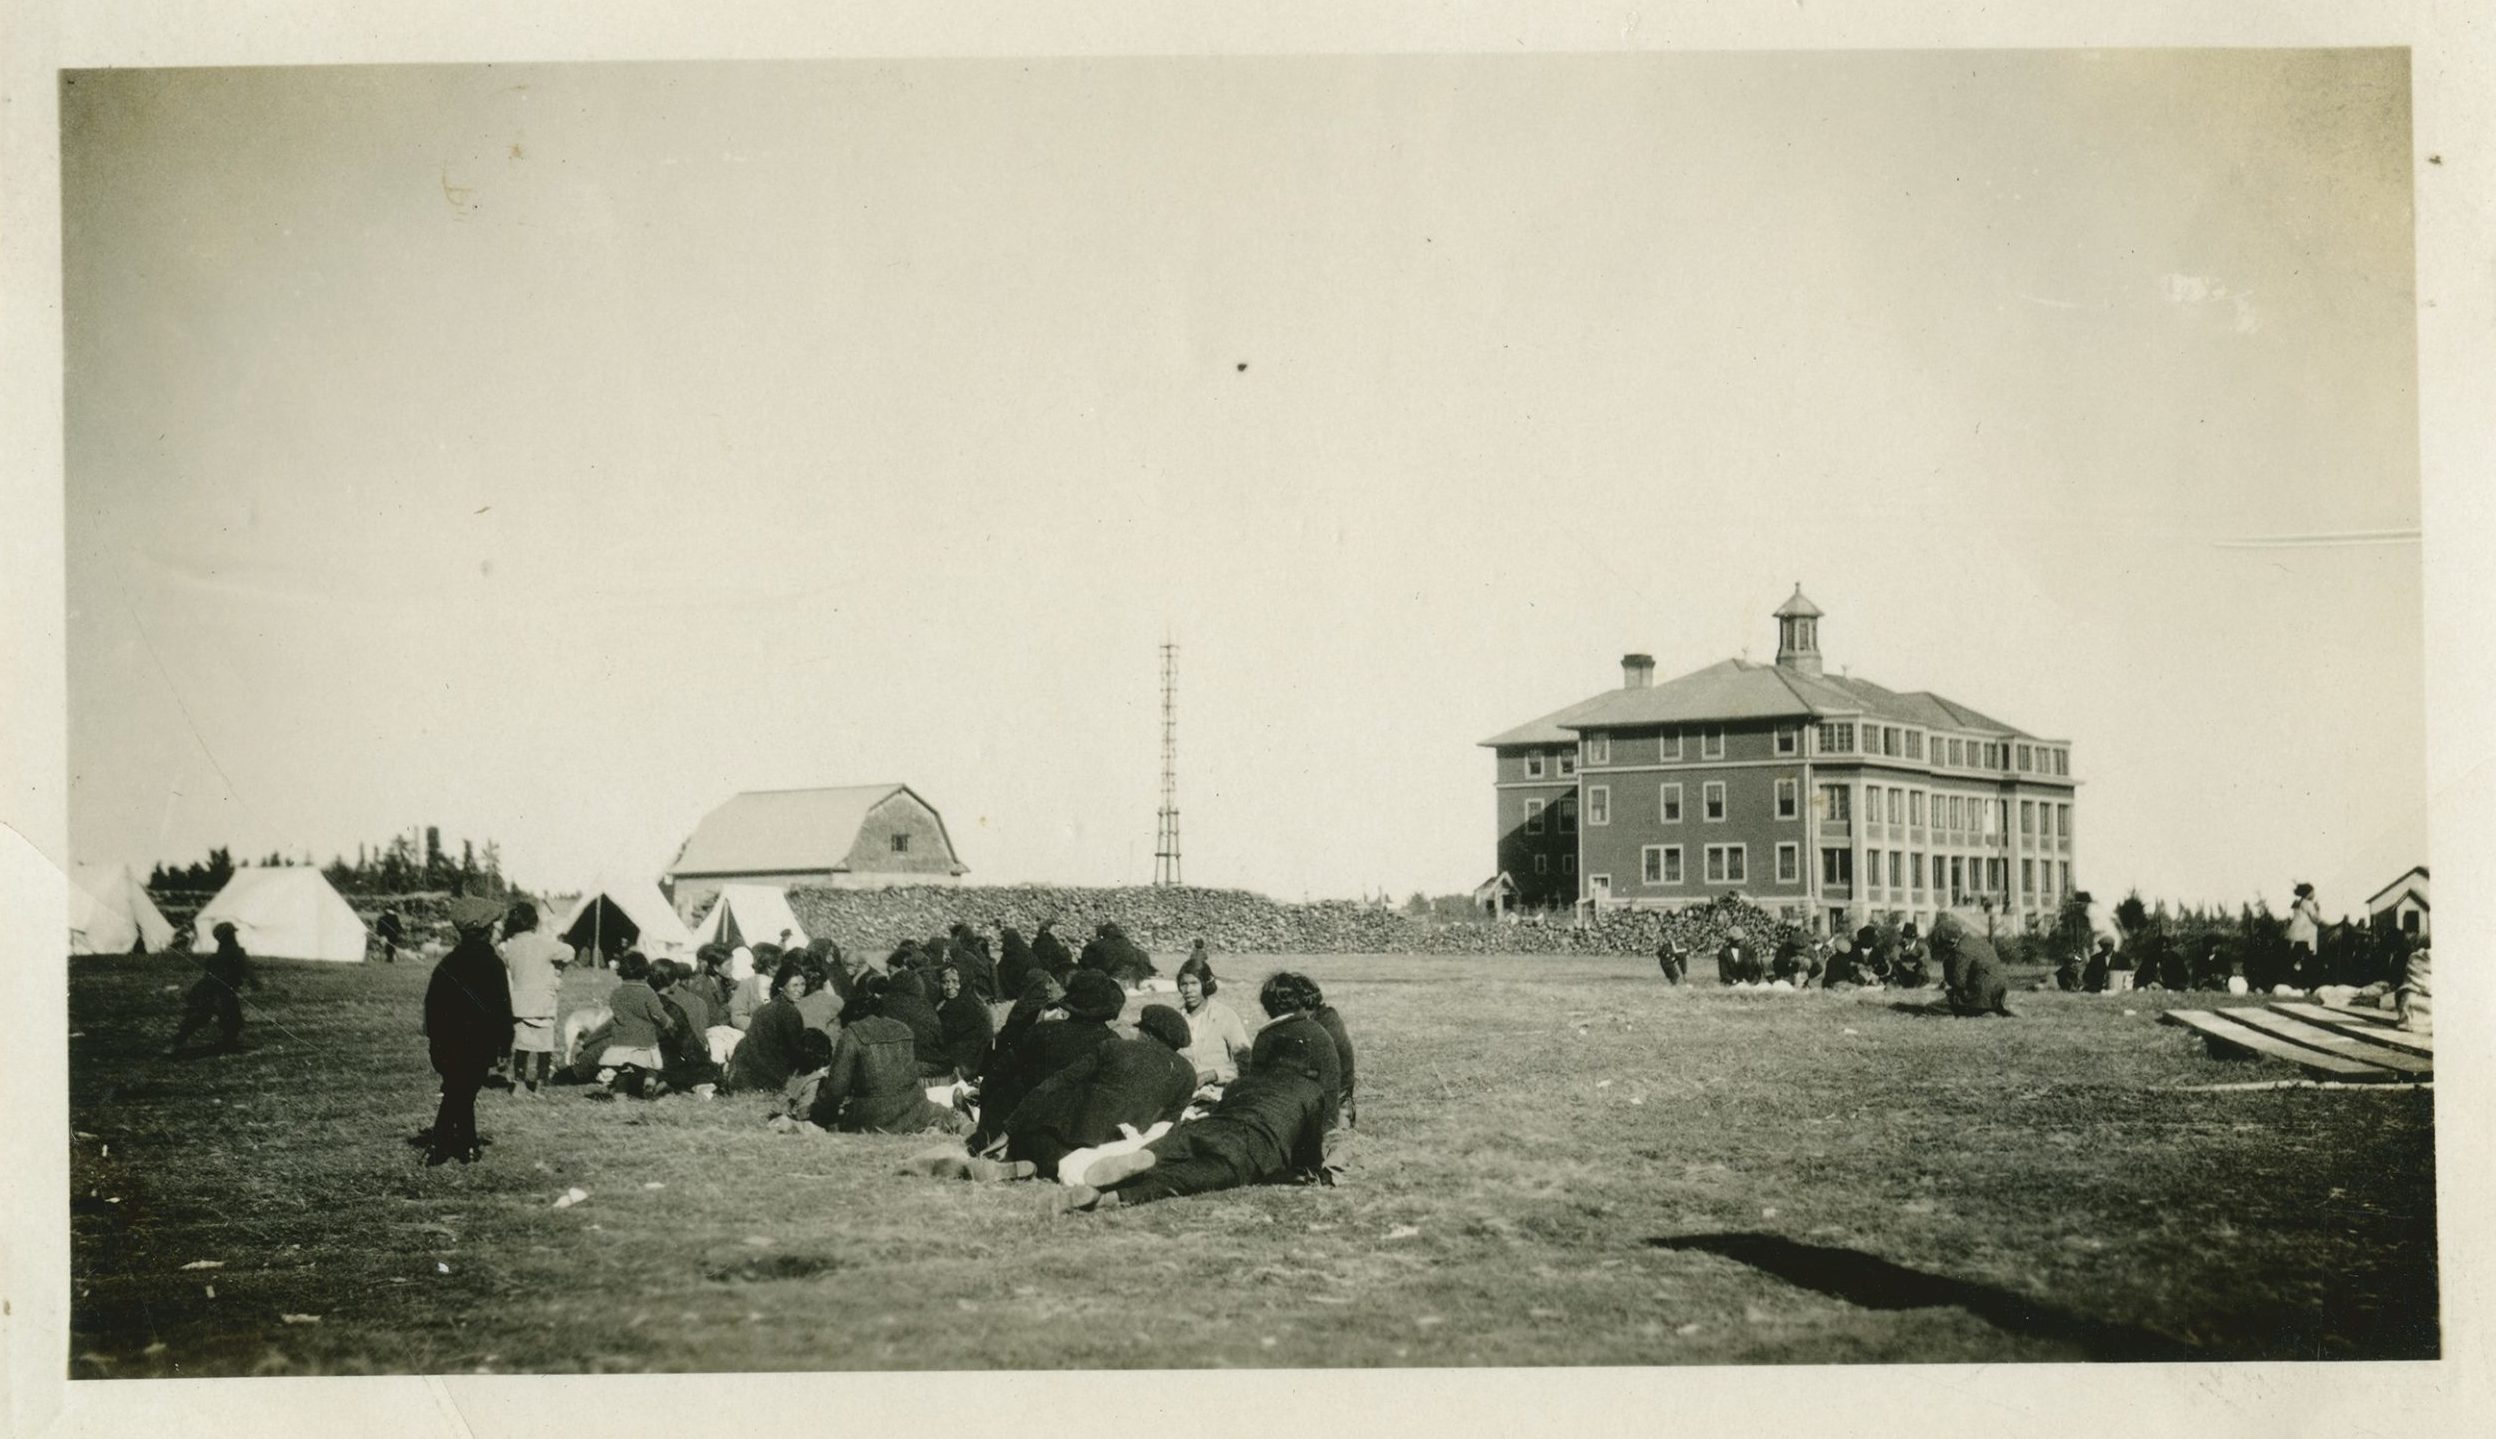 Sepia photograph of groups of people clustered on the flat ground in front of a three-storey building.